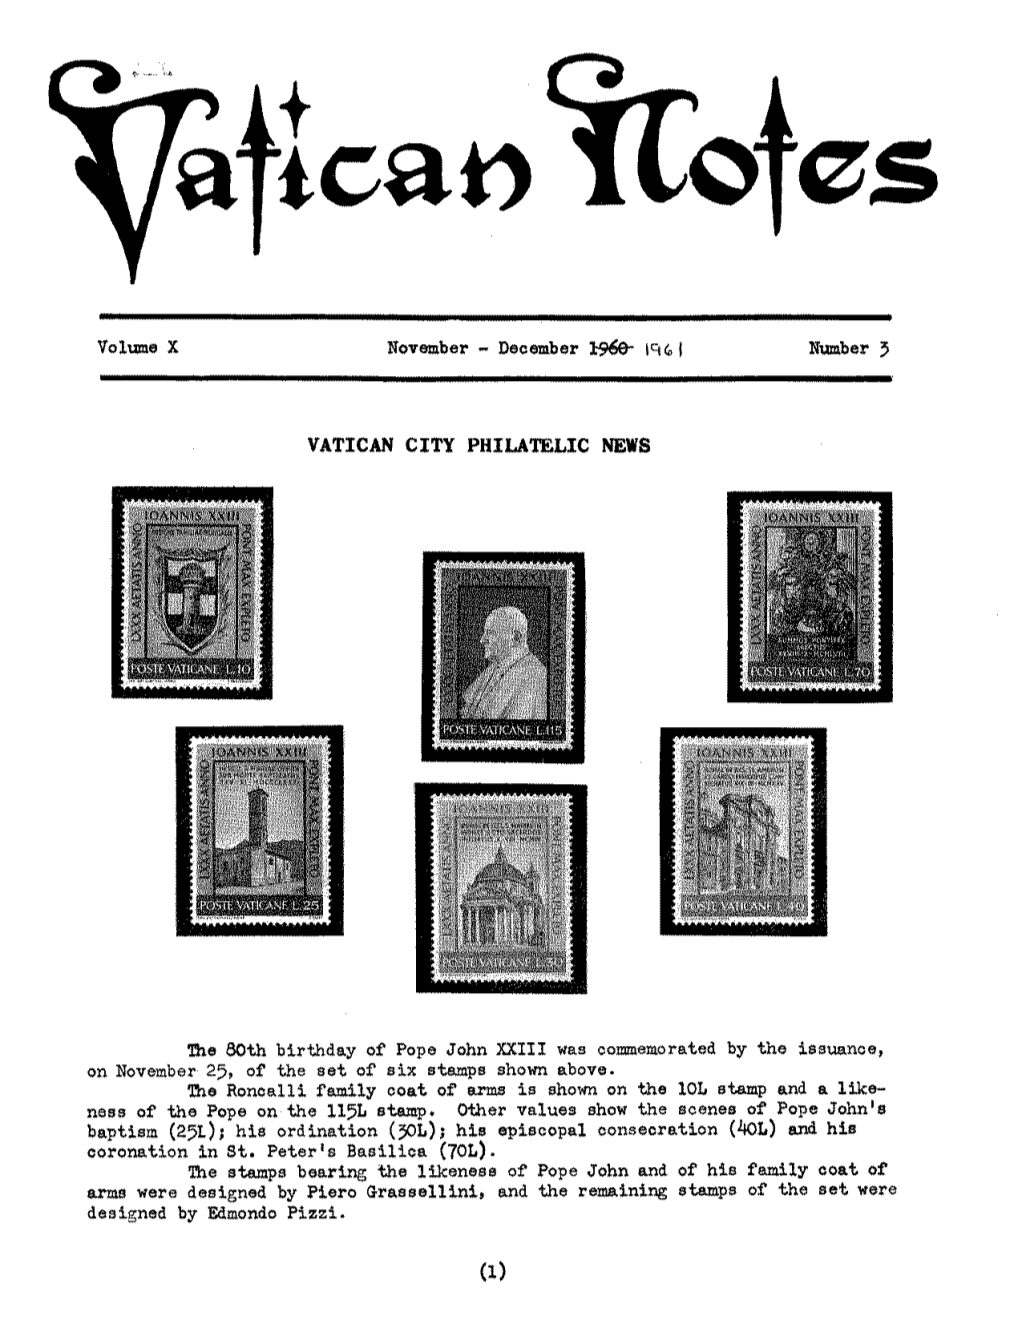 VATICAN NOTES We Hope to Print Some Interesting Excerpts from This Document